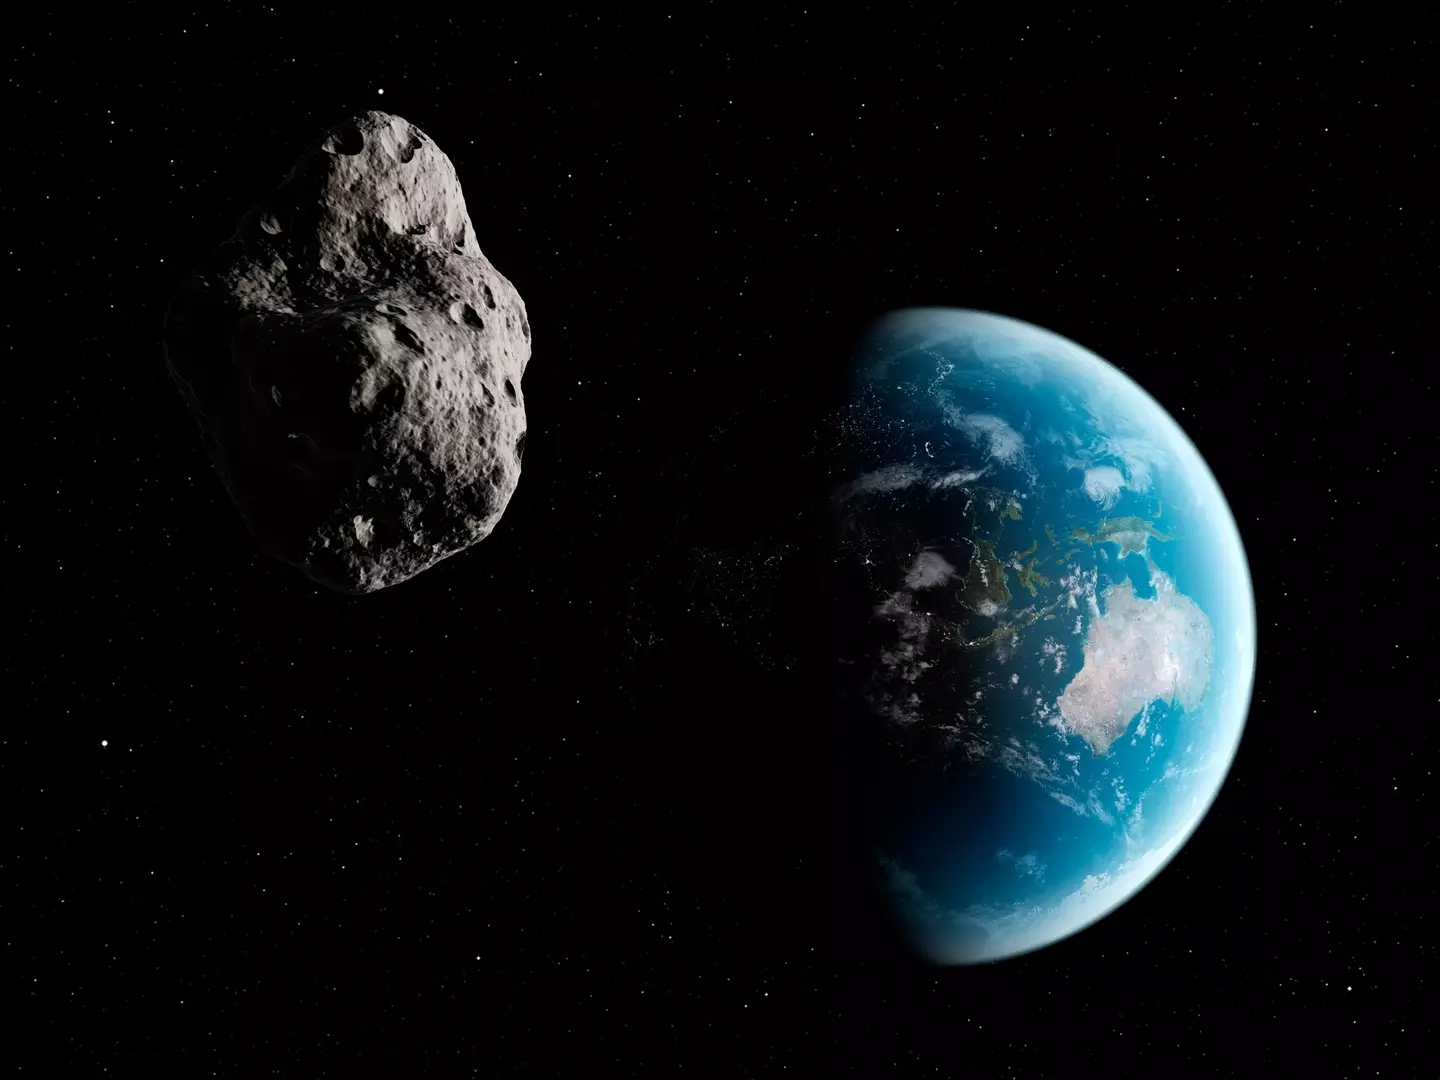 NASA have officially knocked an asteroid off course.